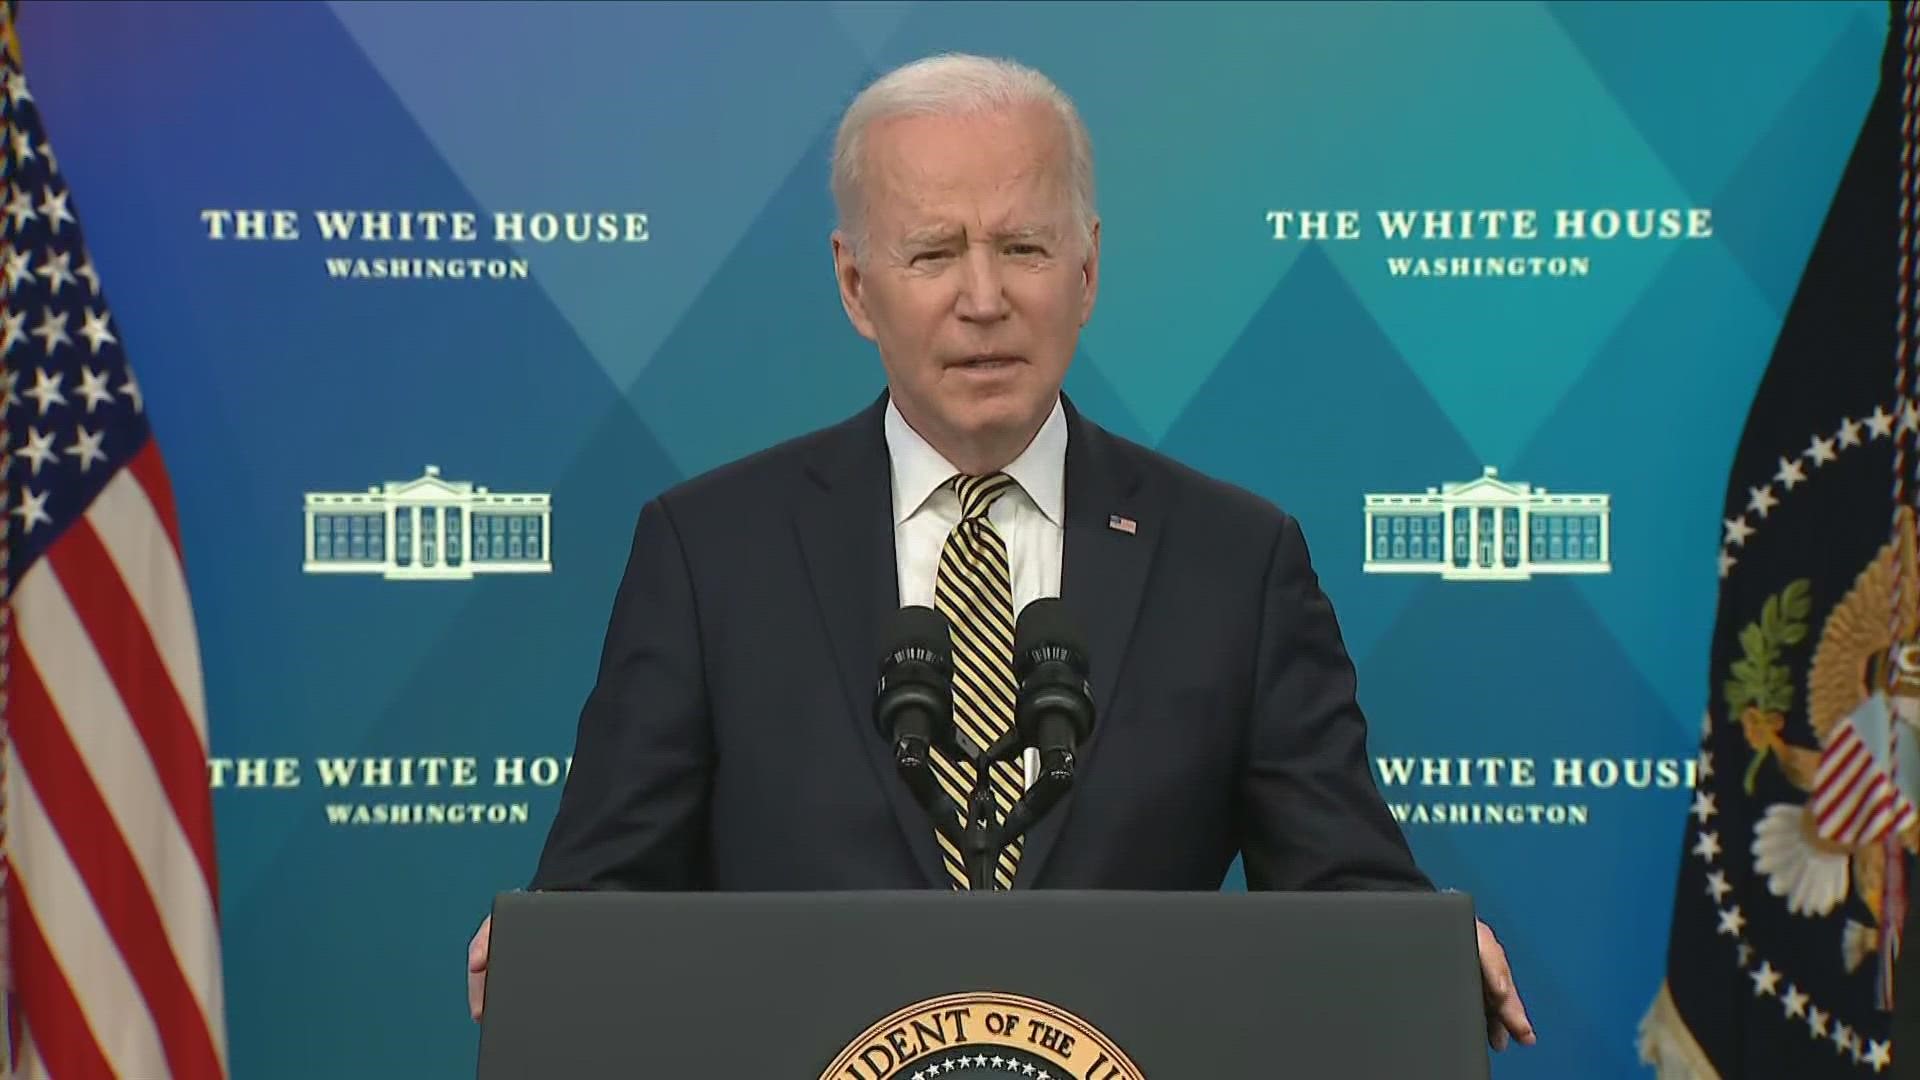 President Joe Biden singed an additional $800 million security aid package for Ukraine, fulfilling certain requests made by Ukrainian President Zelenskyy.